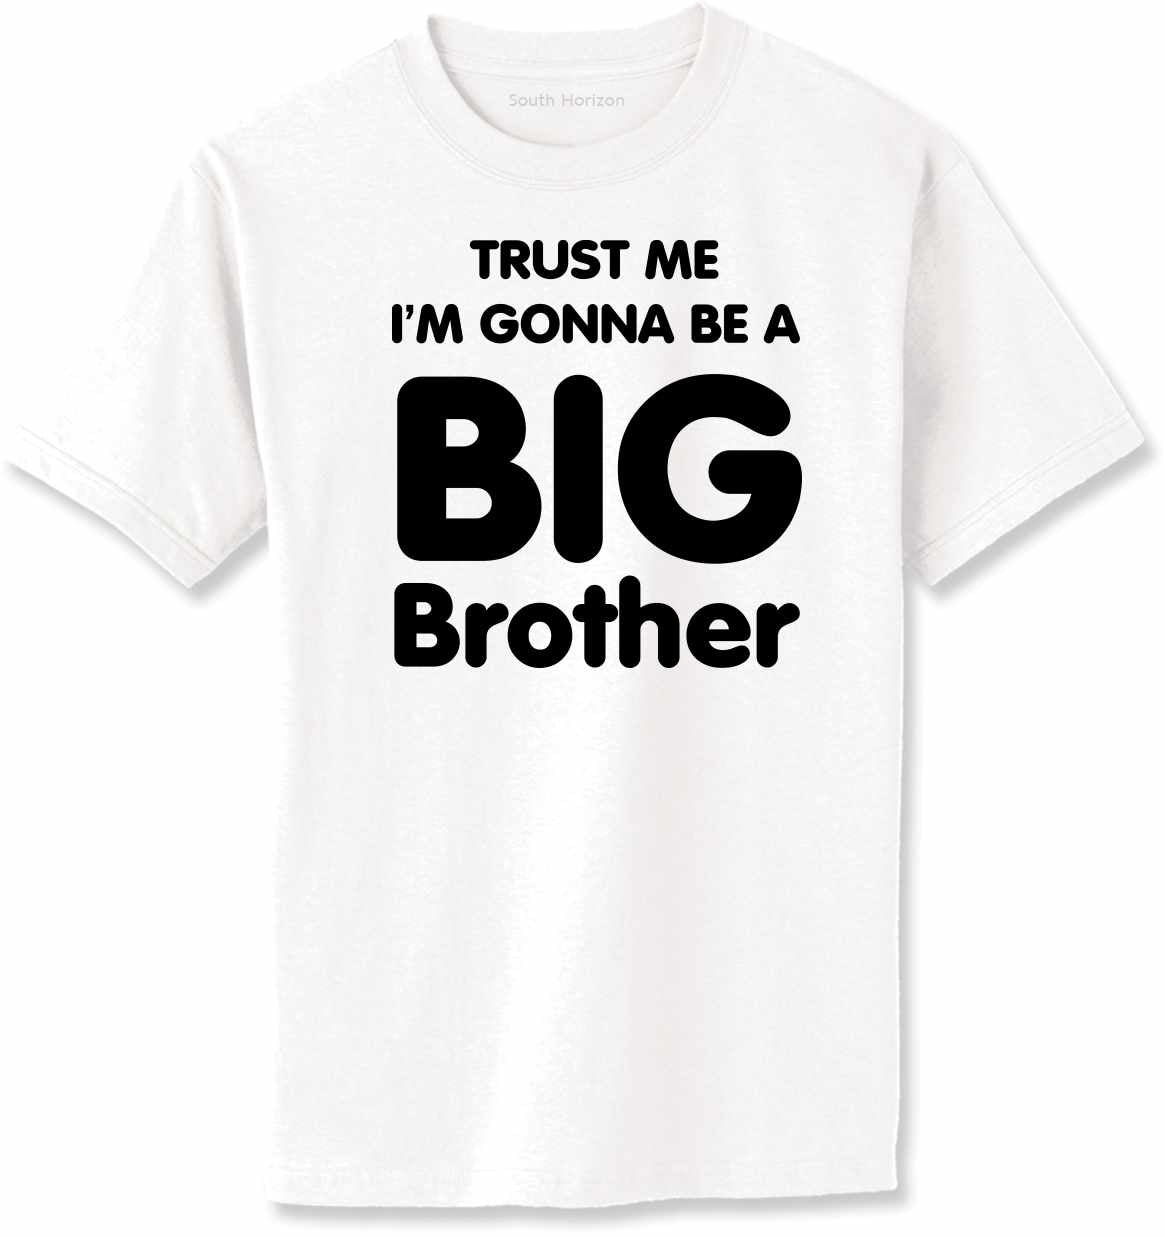 Trust Me I'm Gonna be a Big Brother Adult T-Shirt (#810-1)